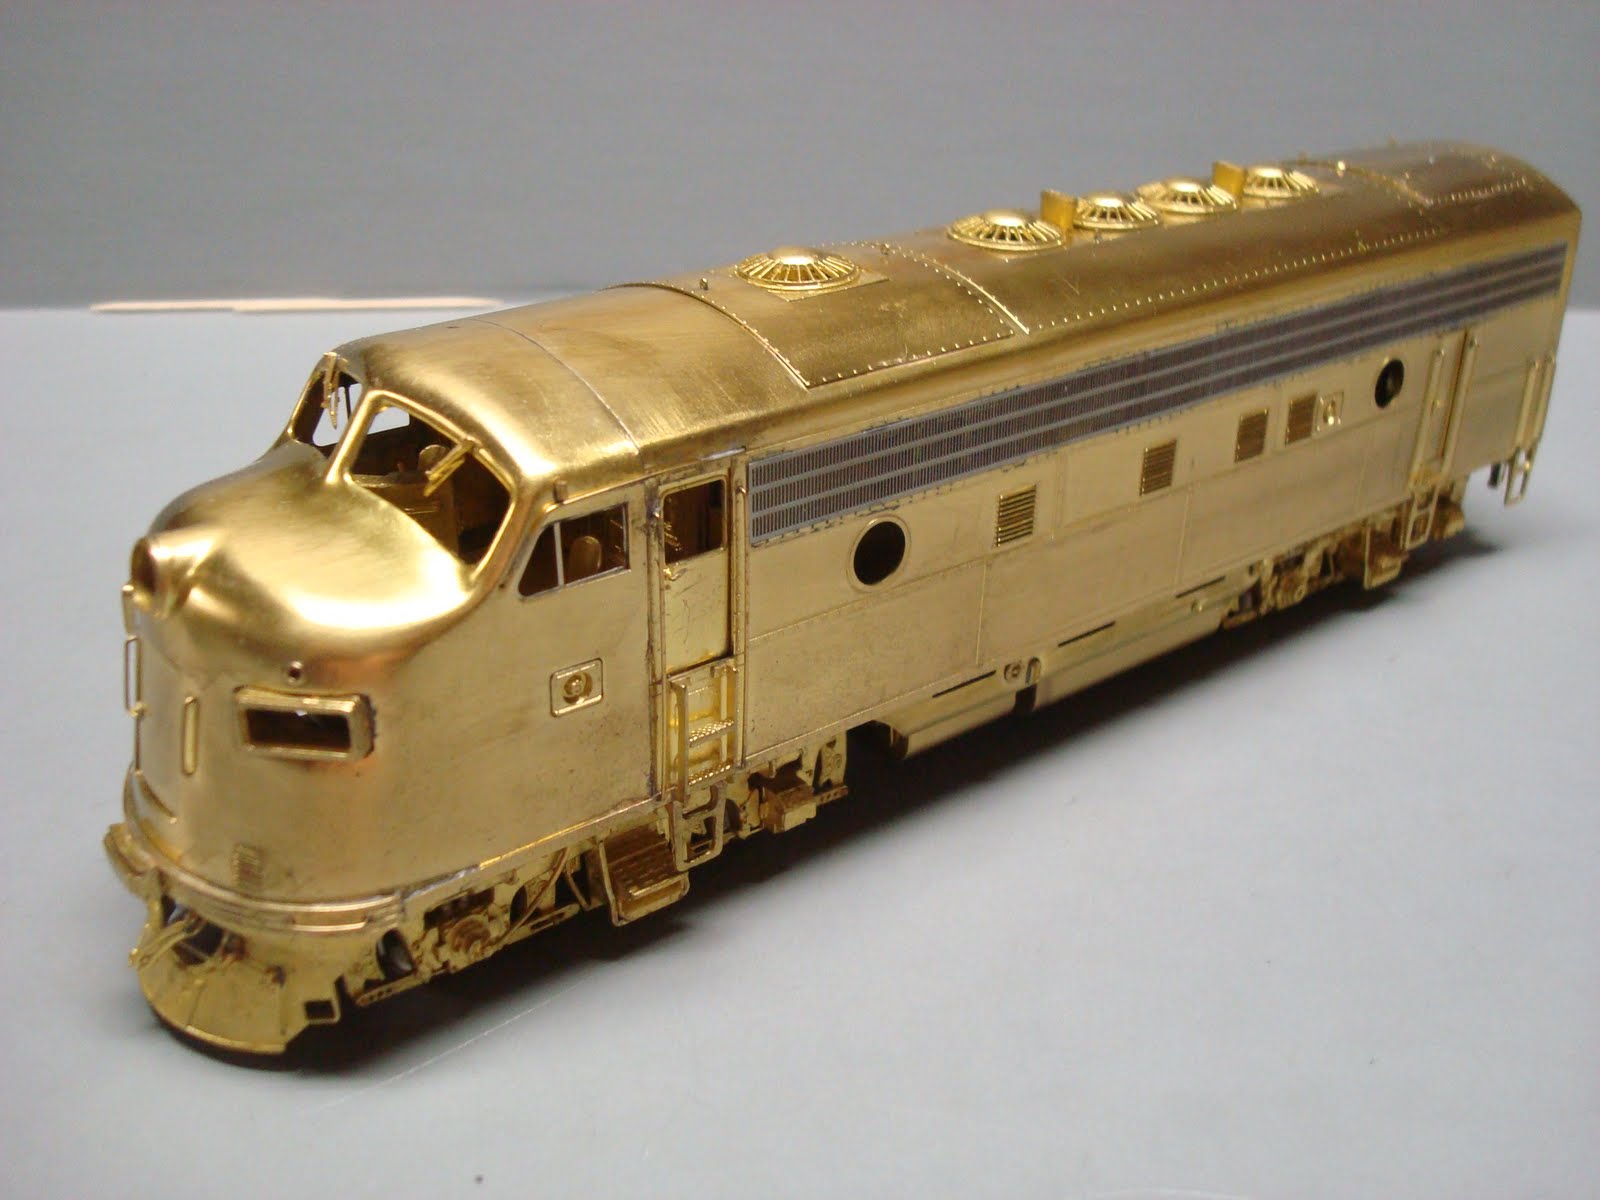 Images and photos of train models | Images of everything